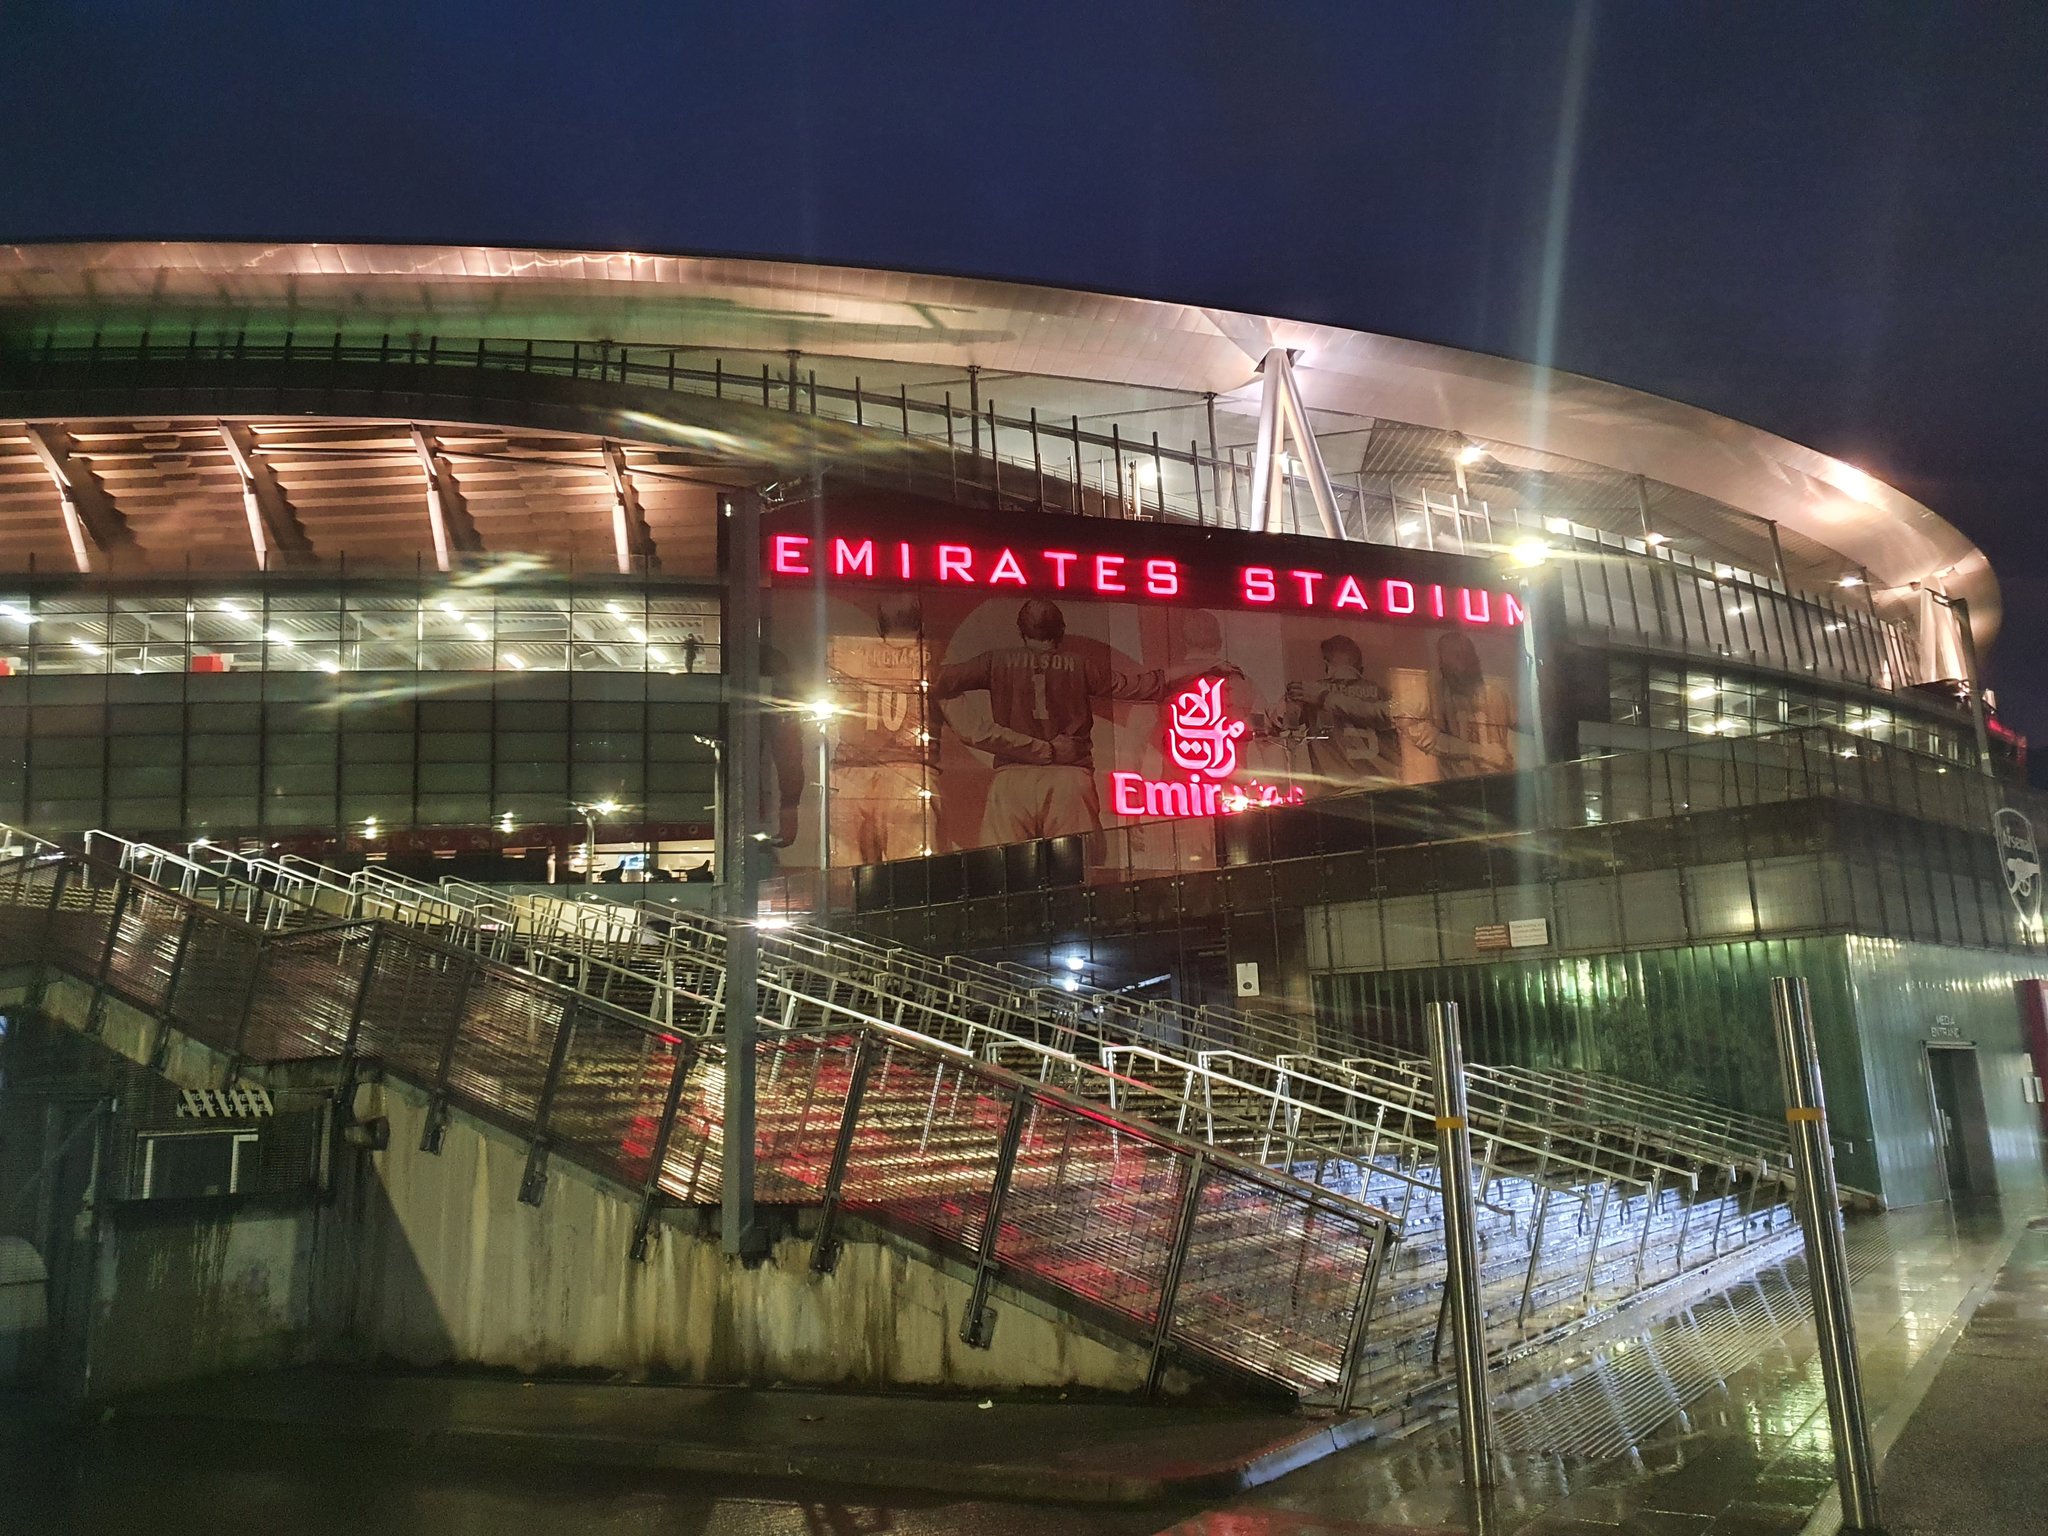 Sunday Night At The Emirates: Loyal Gooner Jon Blair on his long-awaited trip back to watch his beloved Arsenal - before Tier 3 kicked in